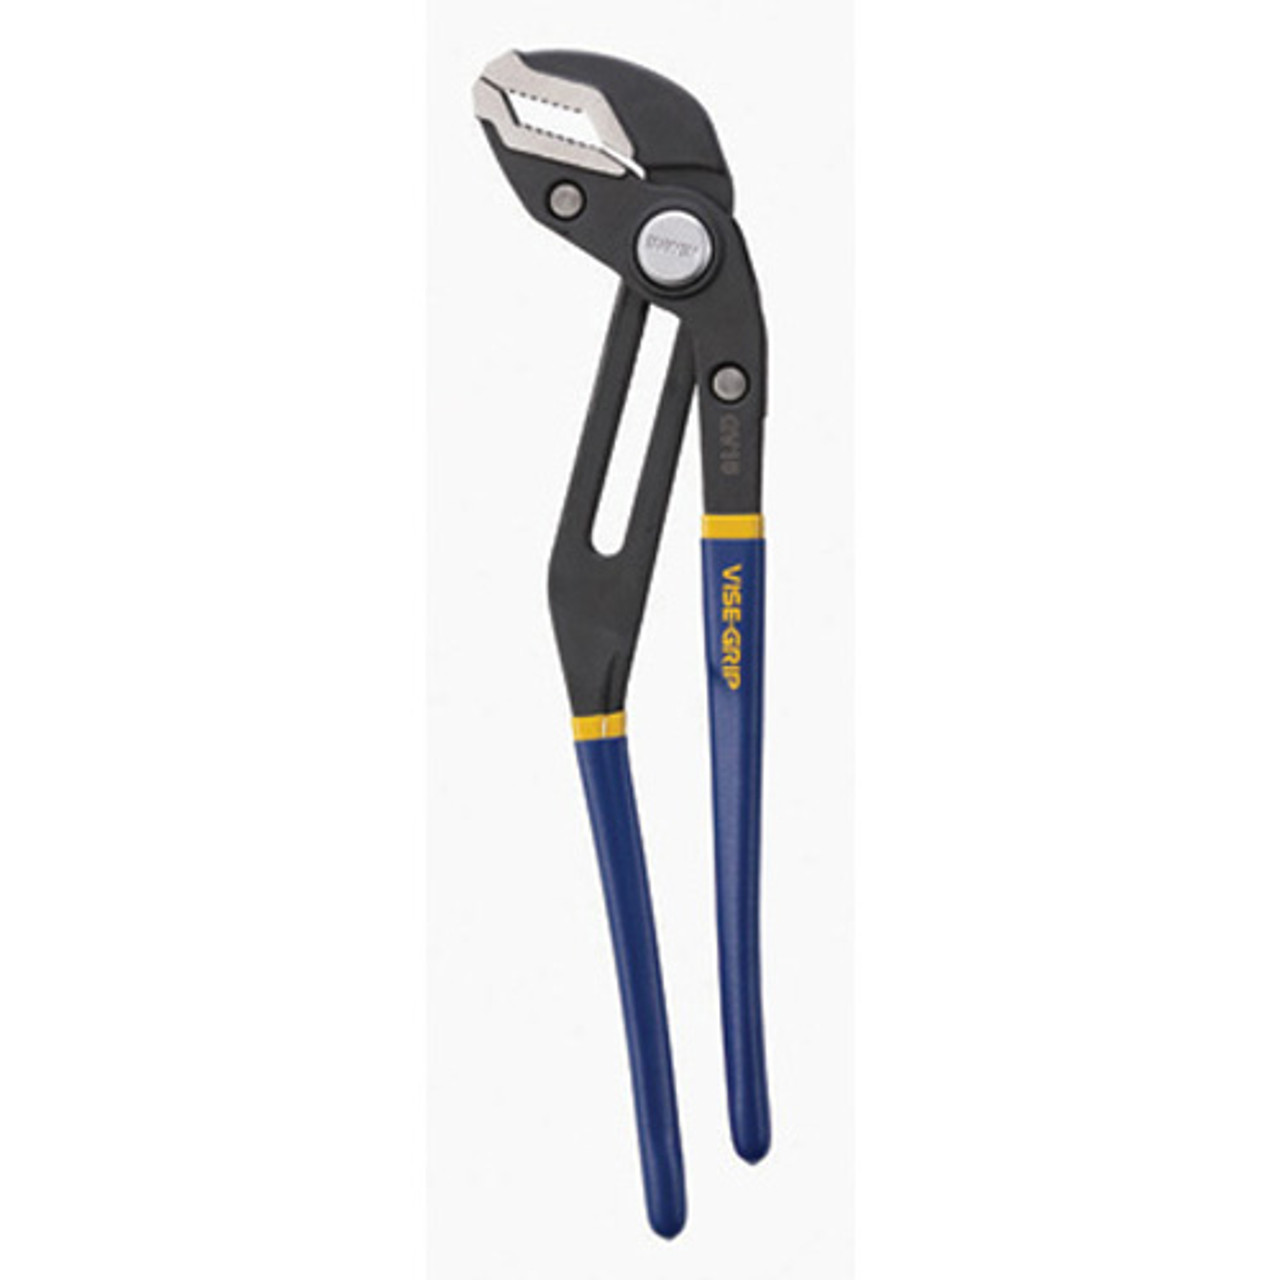 Irwin 4935097 GrooveLock Pliers, Smooth Jaw, 10-Inch